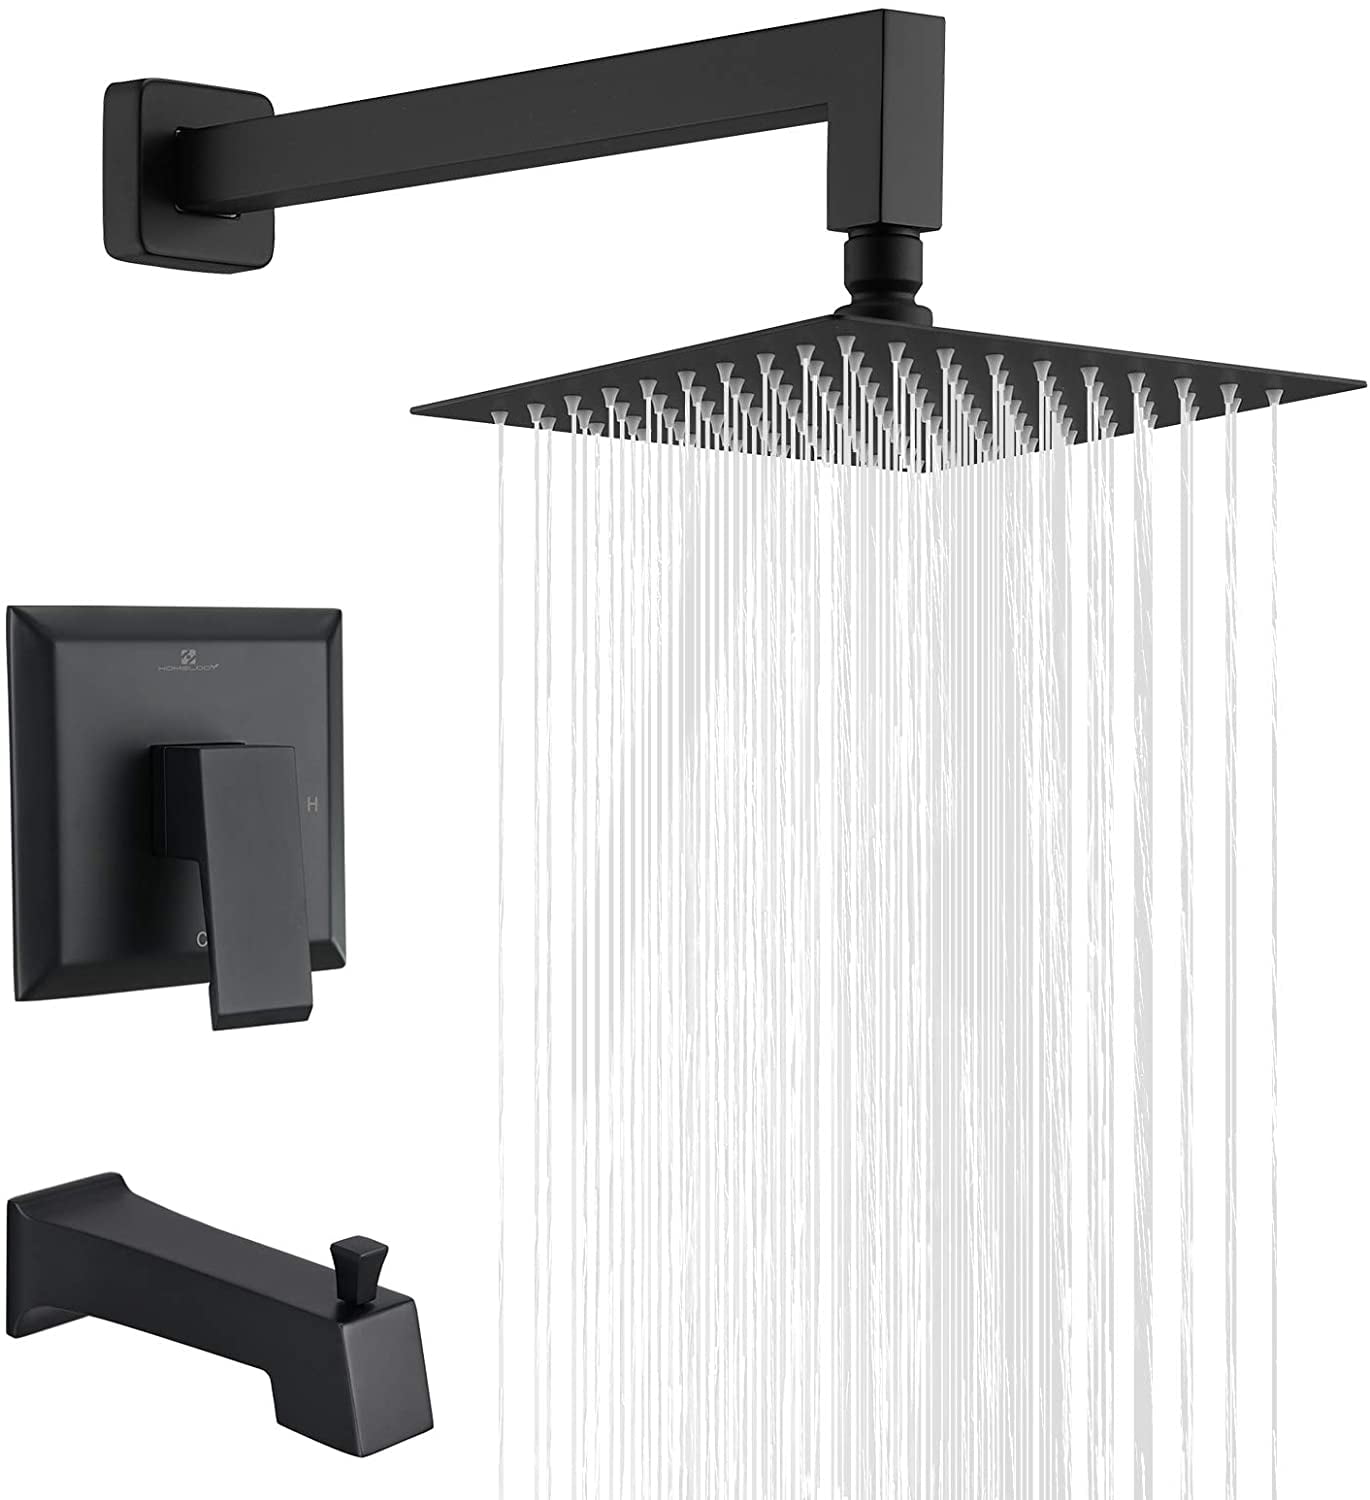 Bathroom Garden Toilet Shower Bathtub Copper Black Shower Faucet Wall-Mounted Hot and Cold Water Mixing Valve Modern Style Simple Shower Accessories Hand Shower Set Sink Faucet